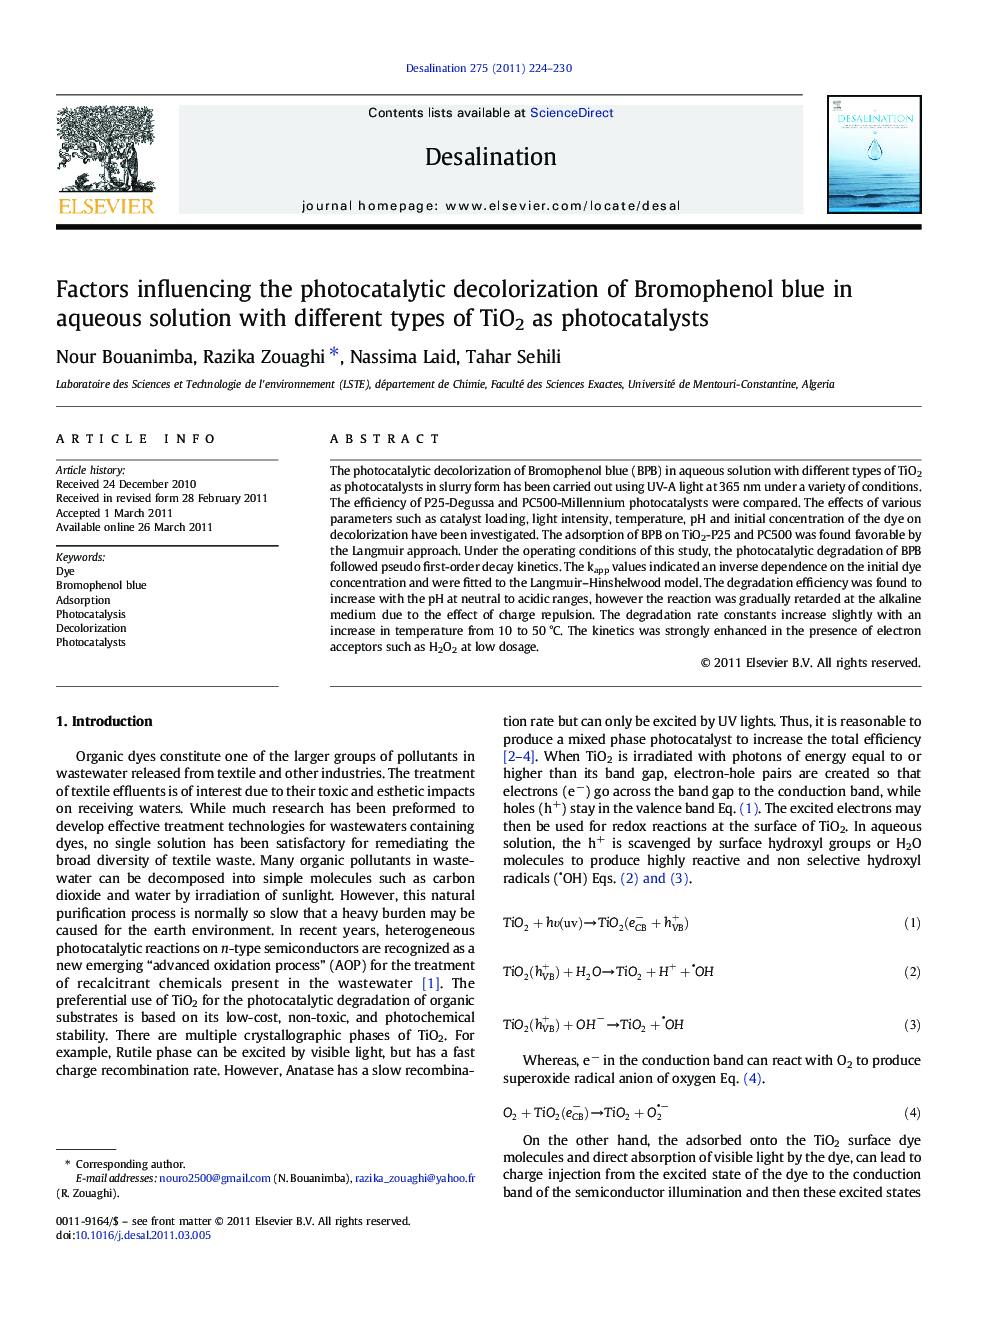 Factors influencing the photocatalytic decolorization of Bromophenol blue in aqueous solution with different types of TiO2 as photocatalysts